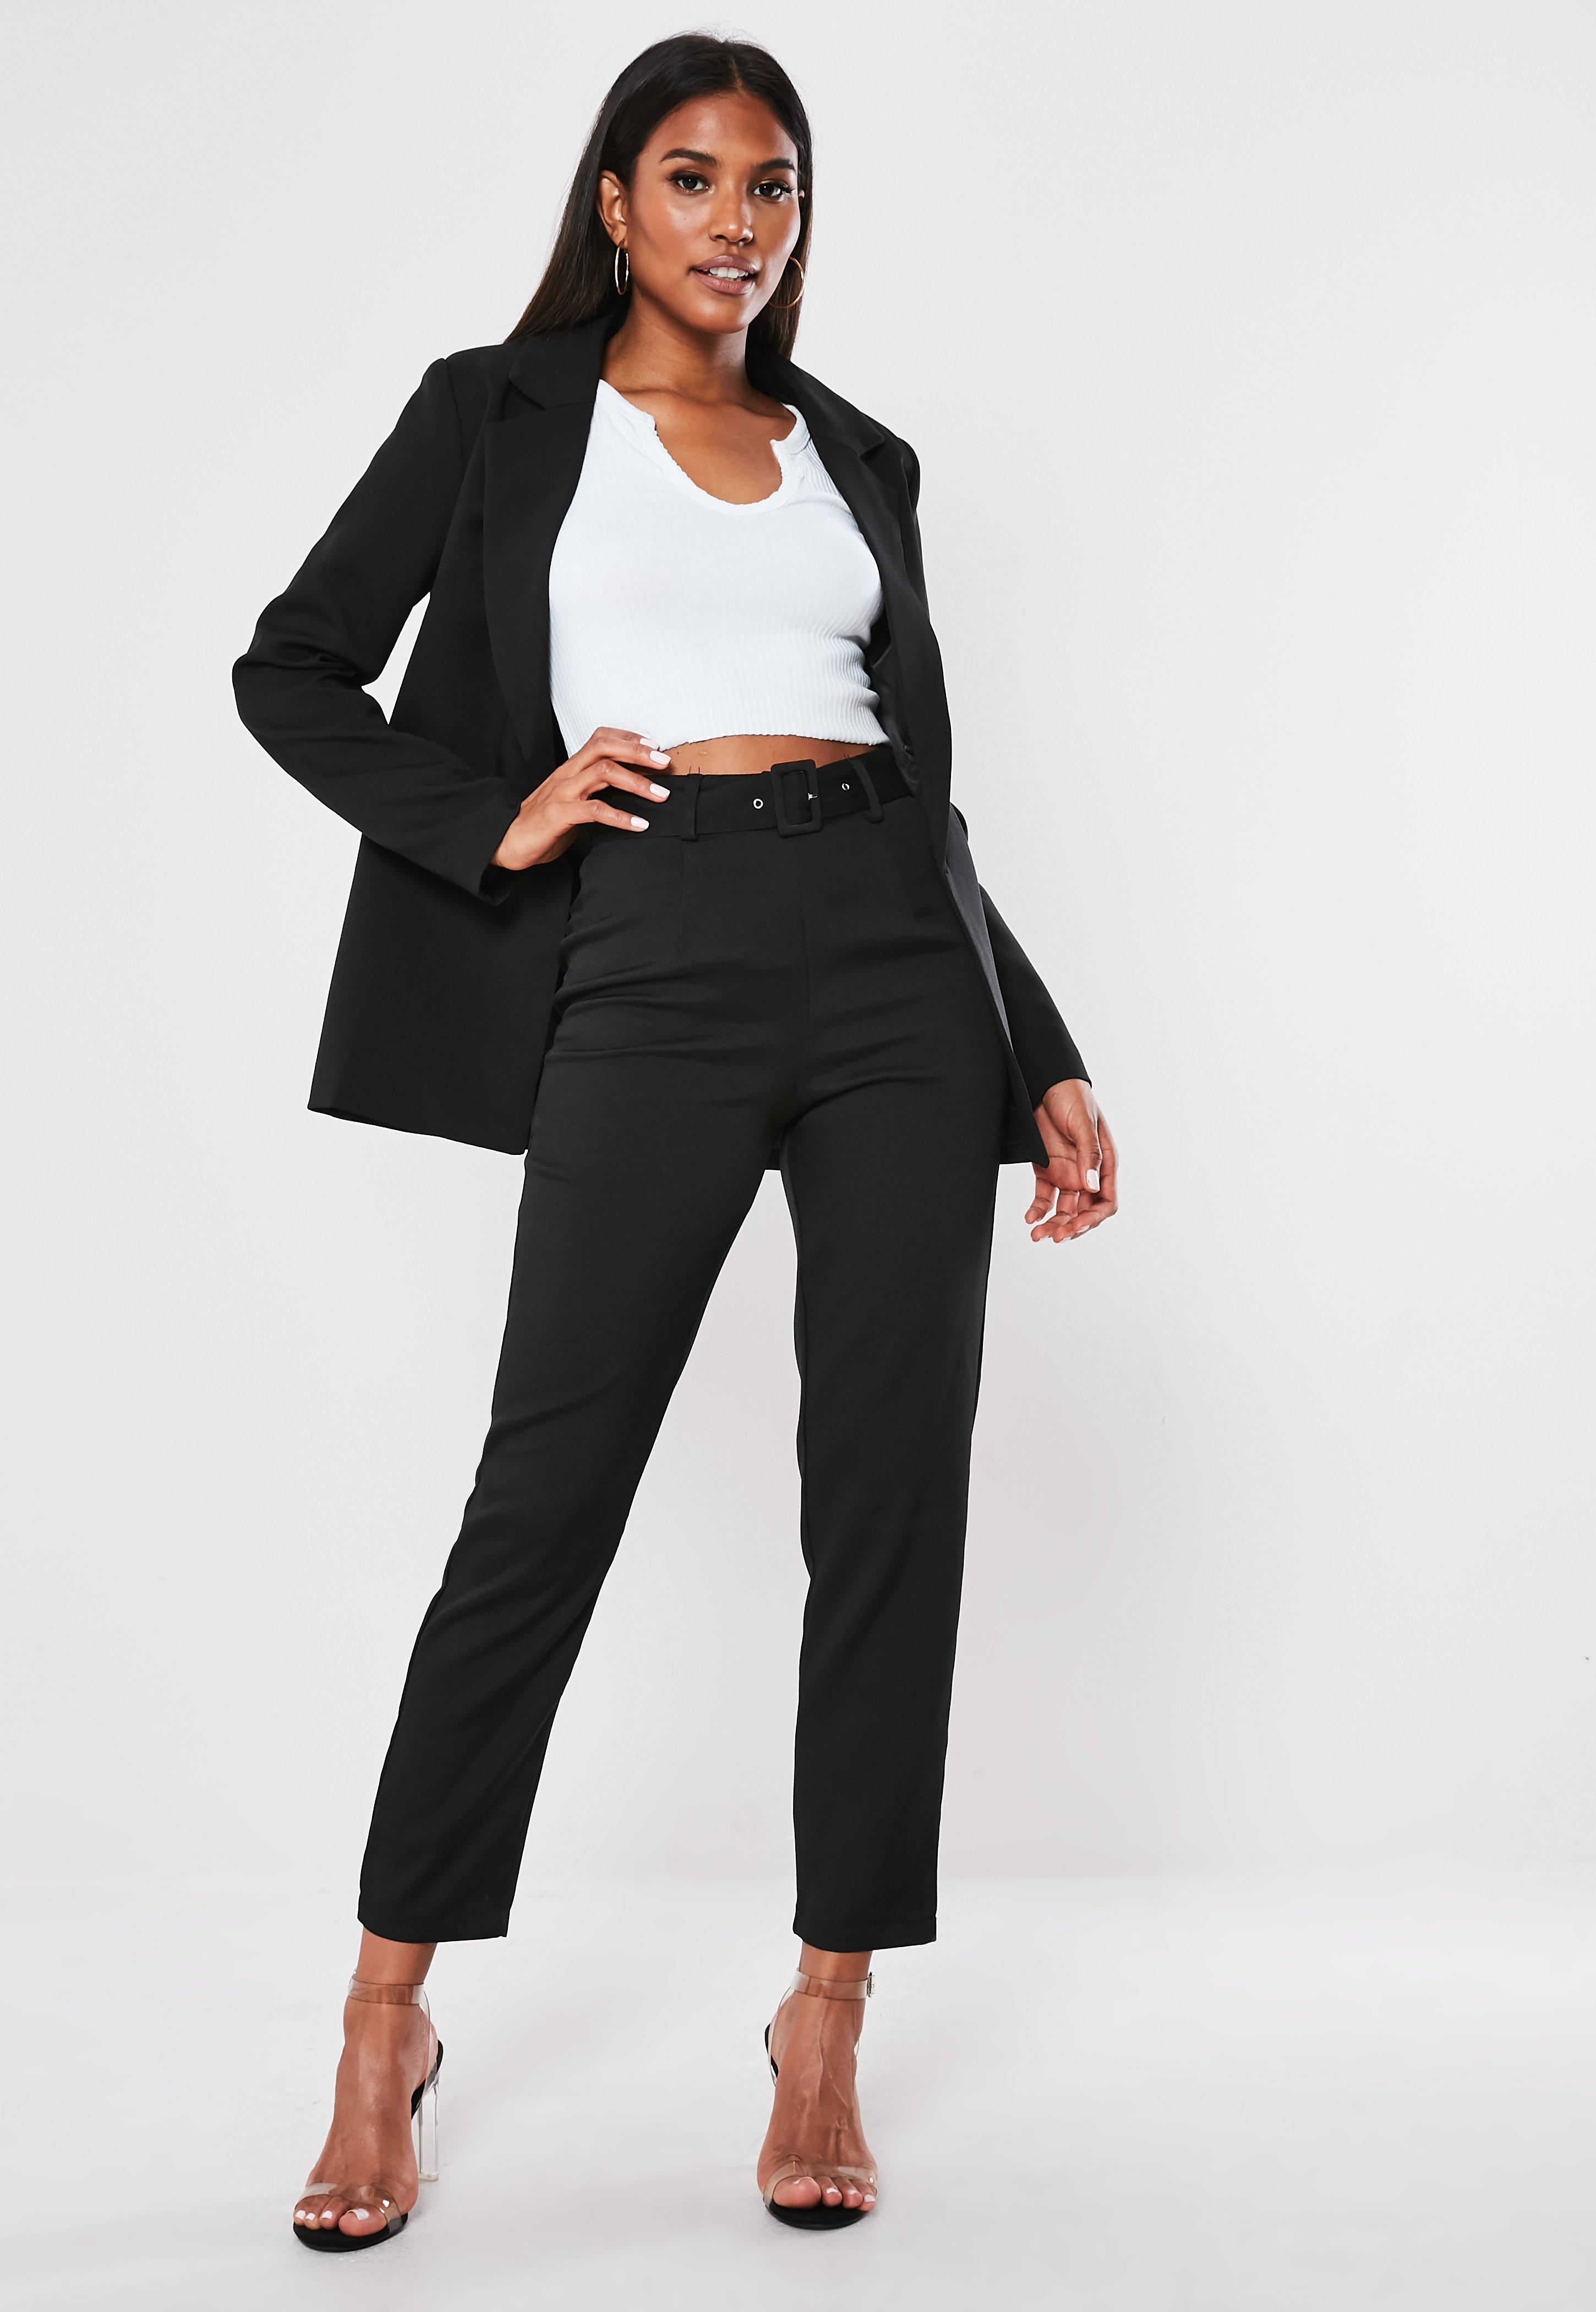 Missguided Synthetic Petite Black Belted Cigarette Pants - Lyst